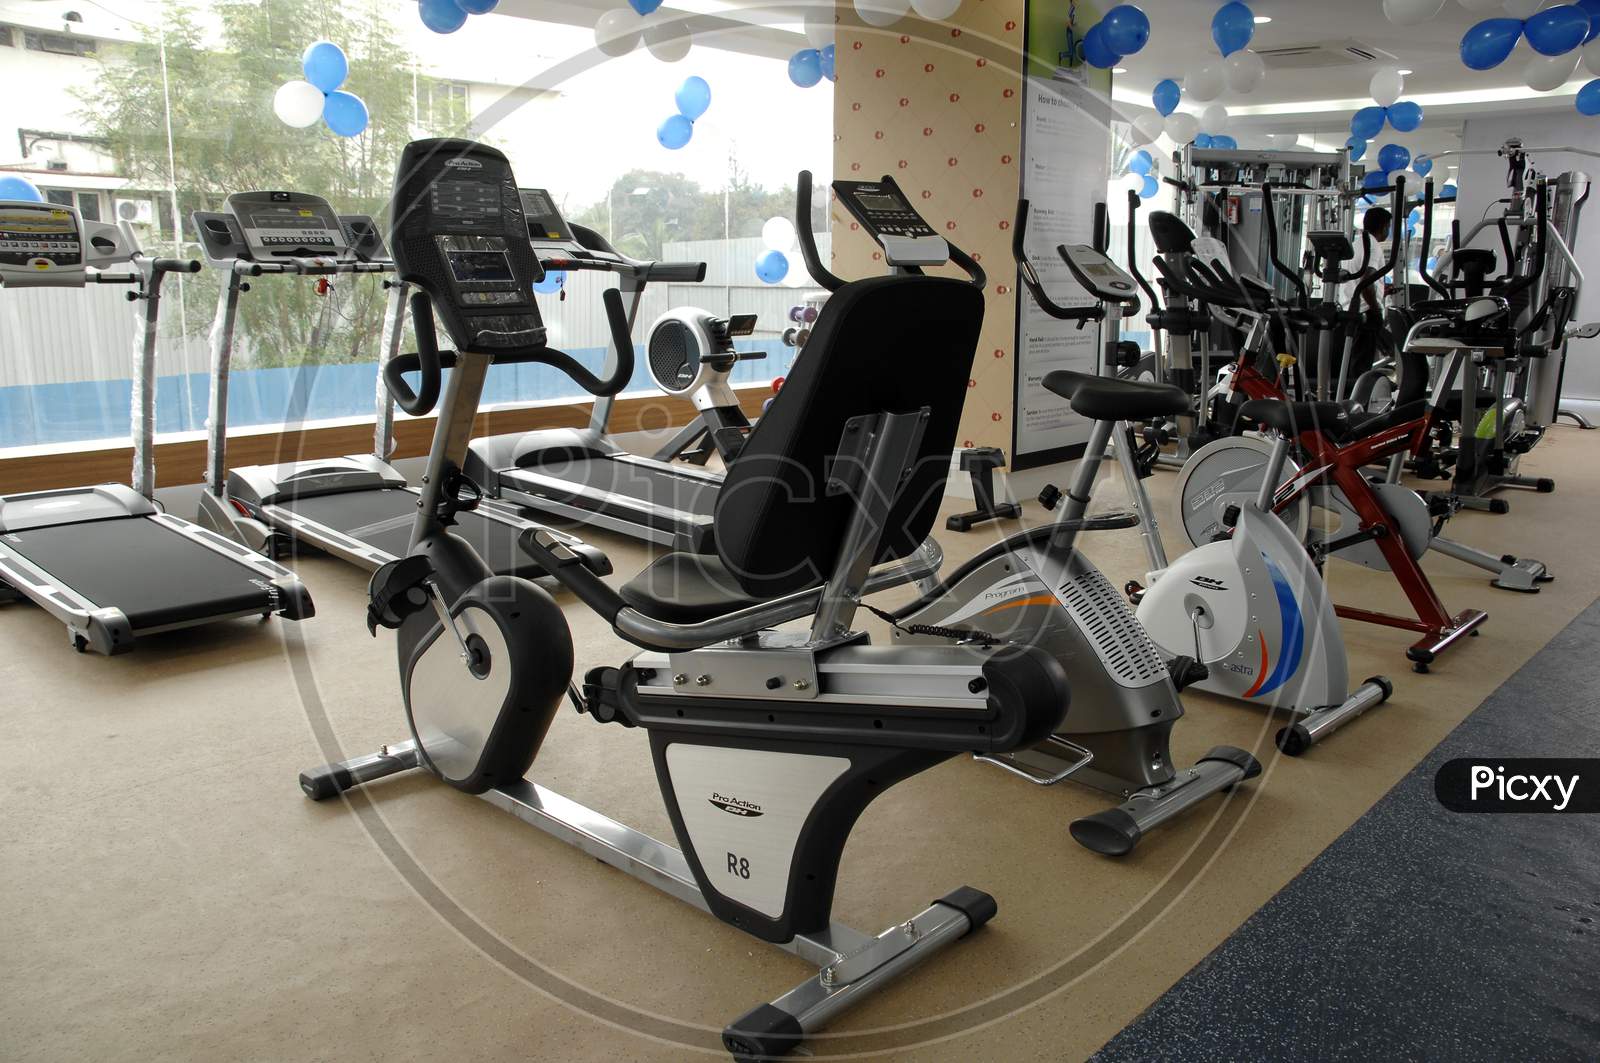 Stationary exercise bikes in a gym